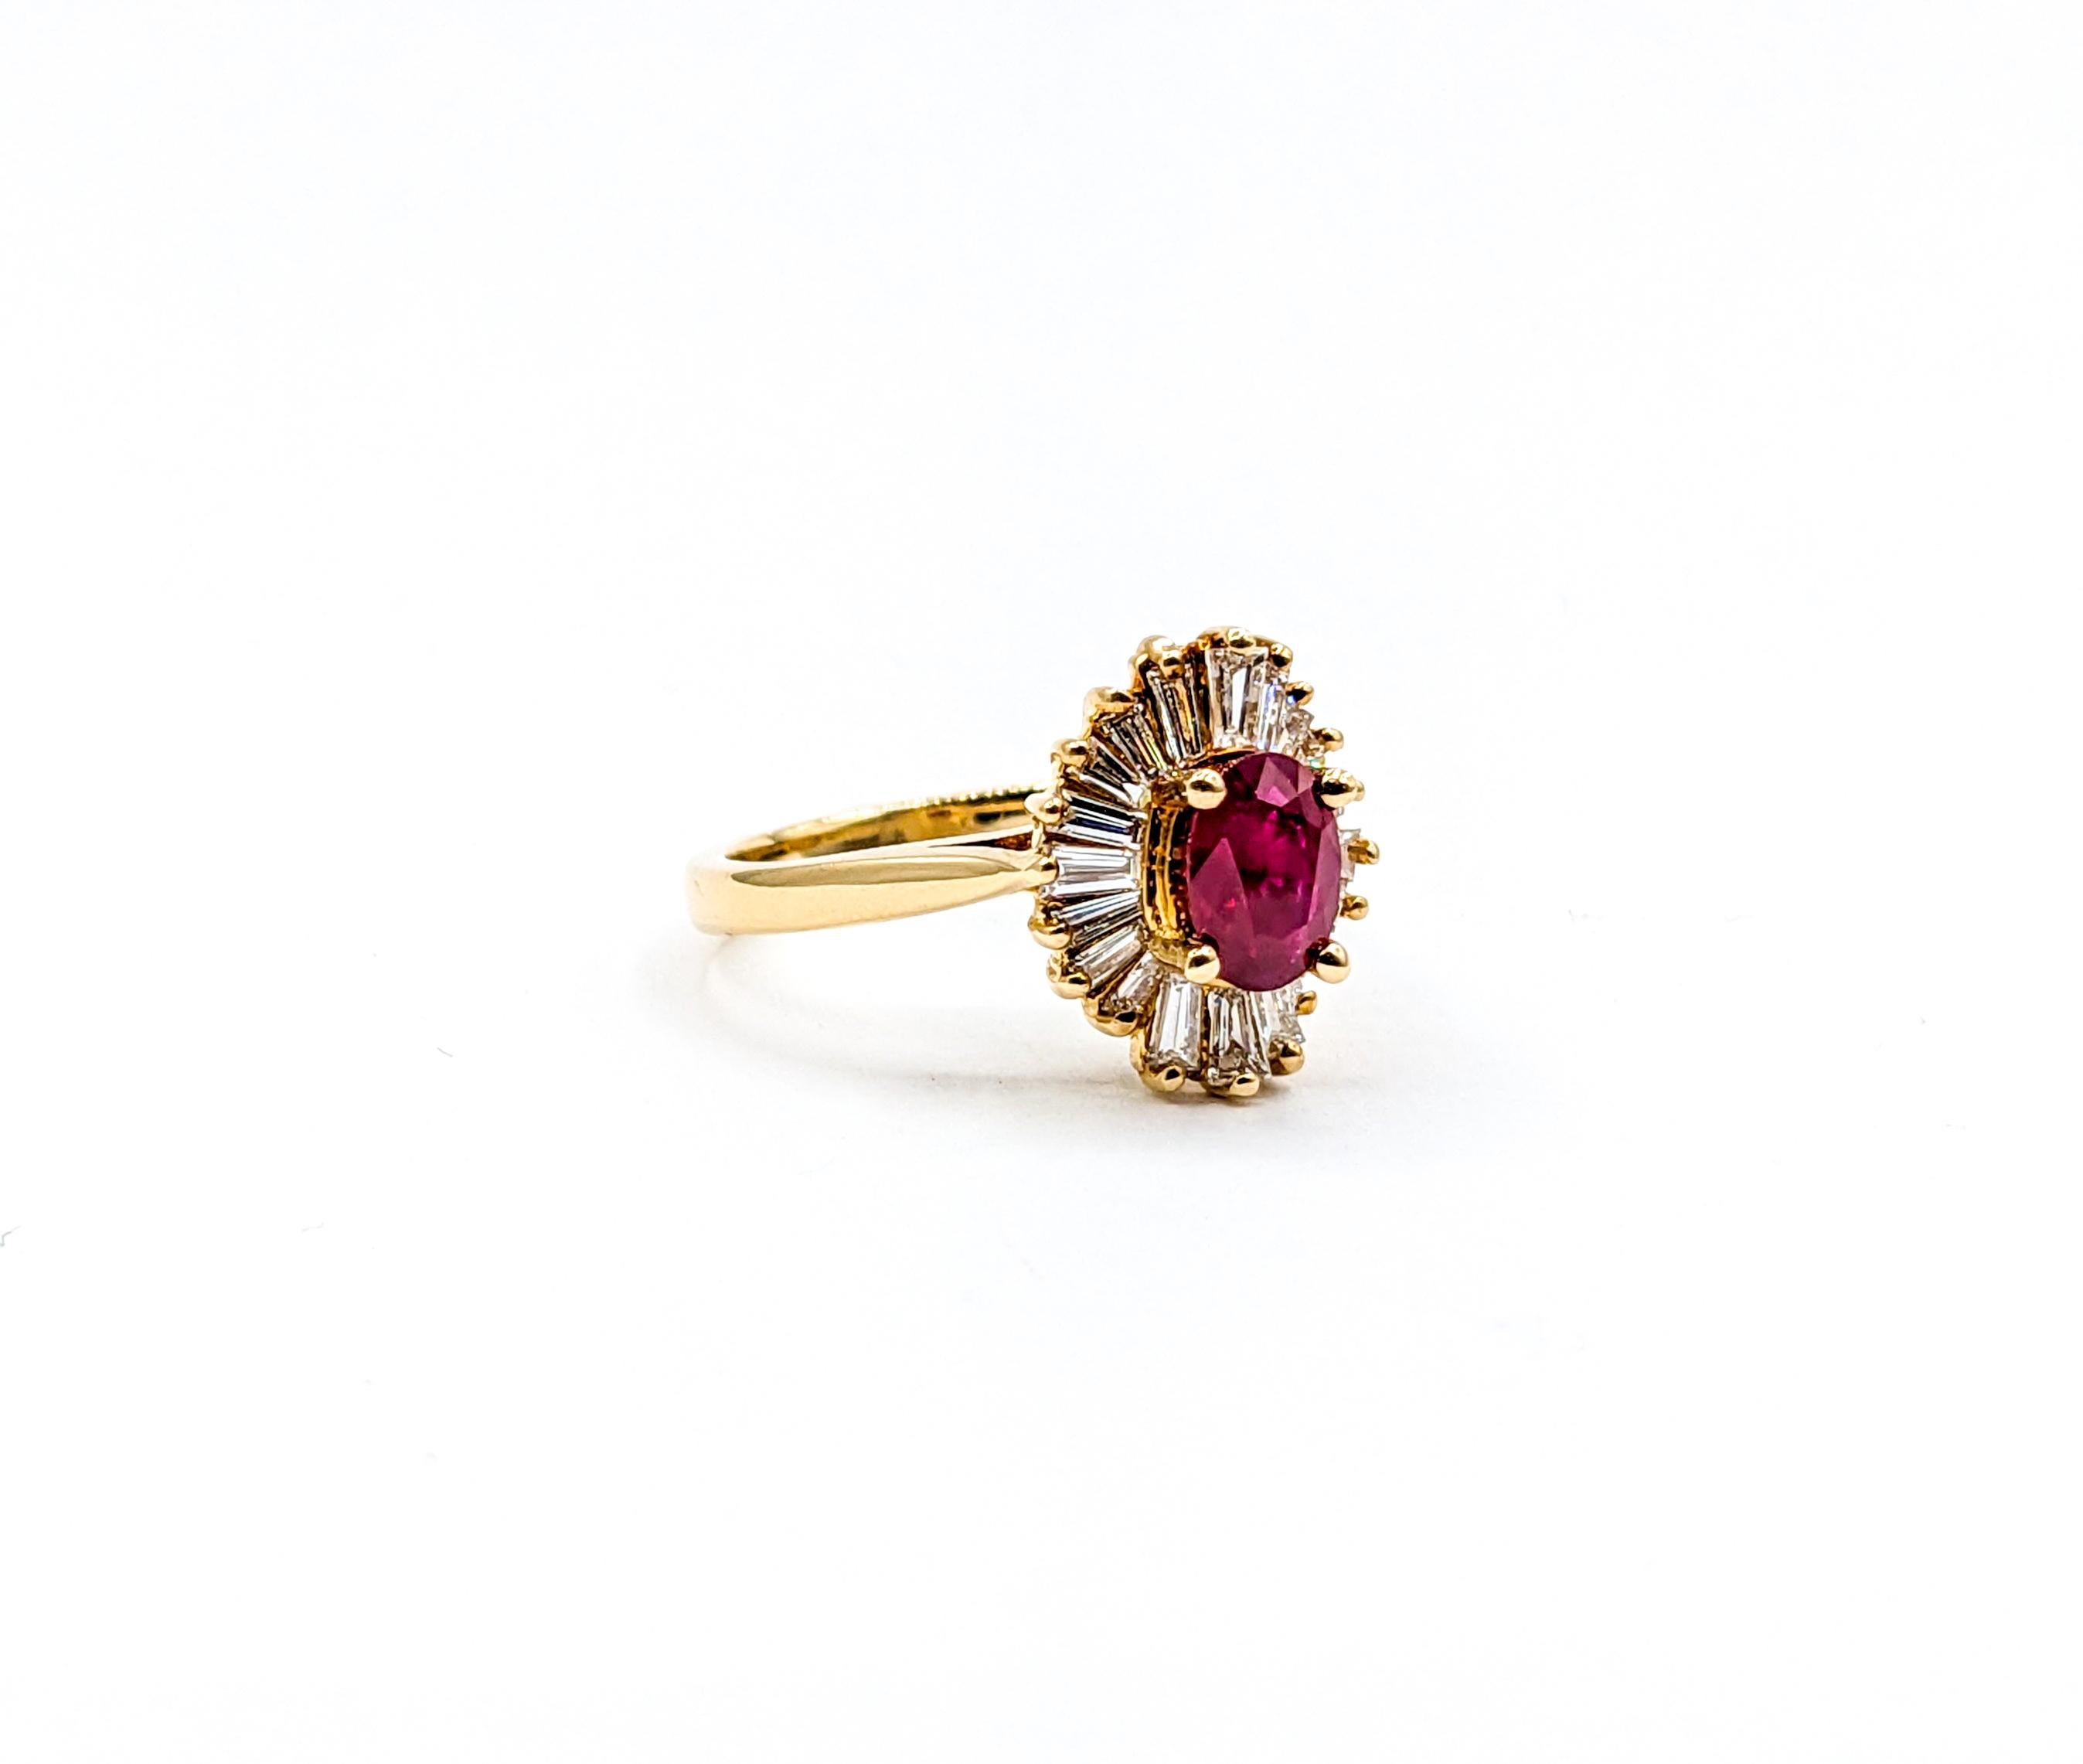 Crimson Ruby & Baguette Diamond Ballerina Ring

This exquisite 14K yellow gold ring is adorned with a captivating array of 1.25ctw tapered baguette diamonds, delicately arranged to create a mesmerizing and dynamic halo around the center ruby. The